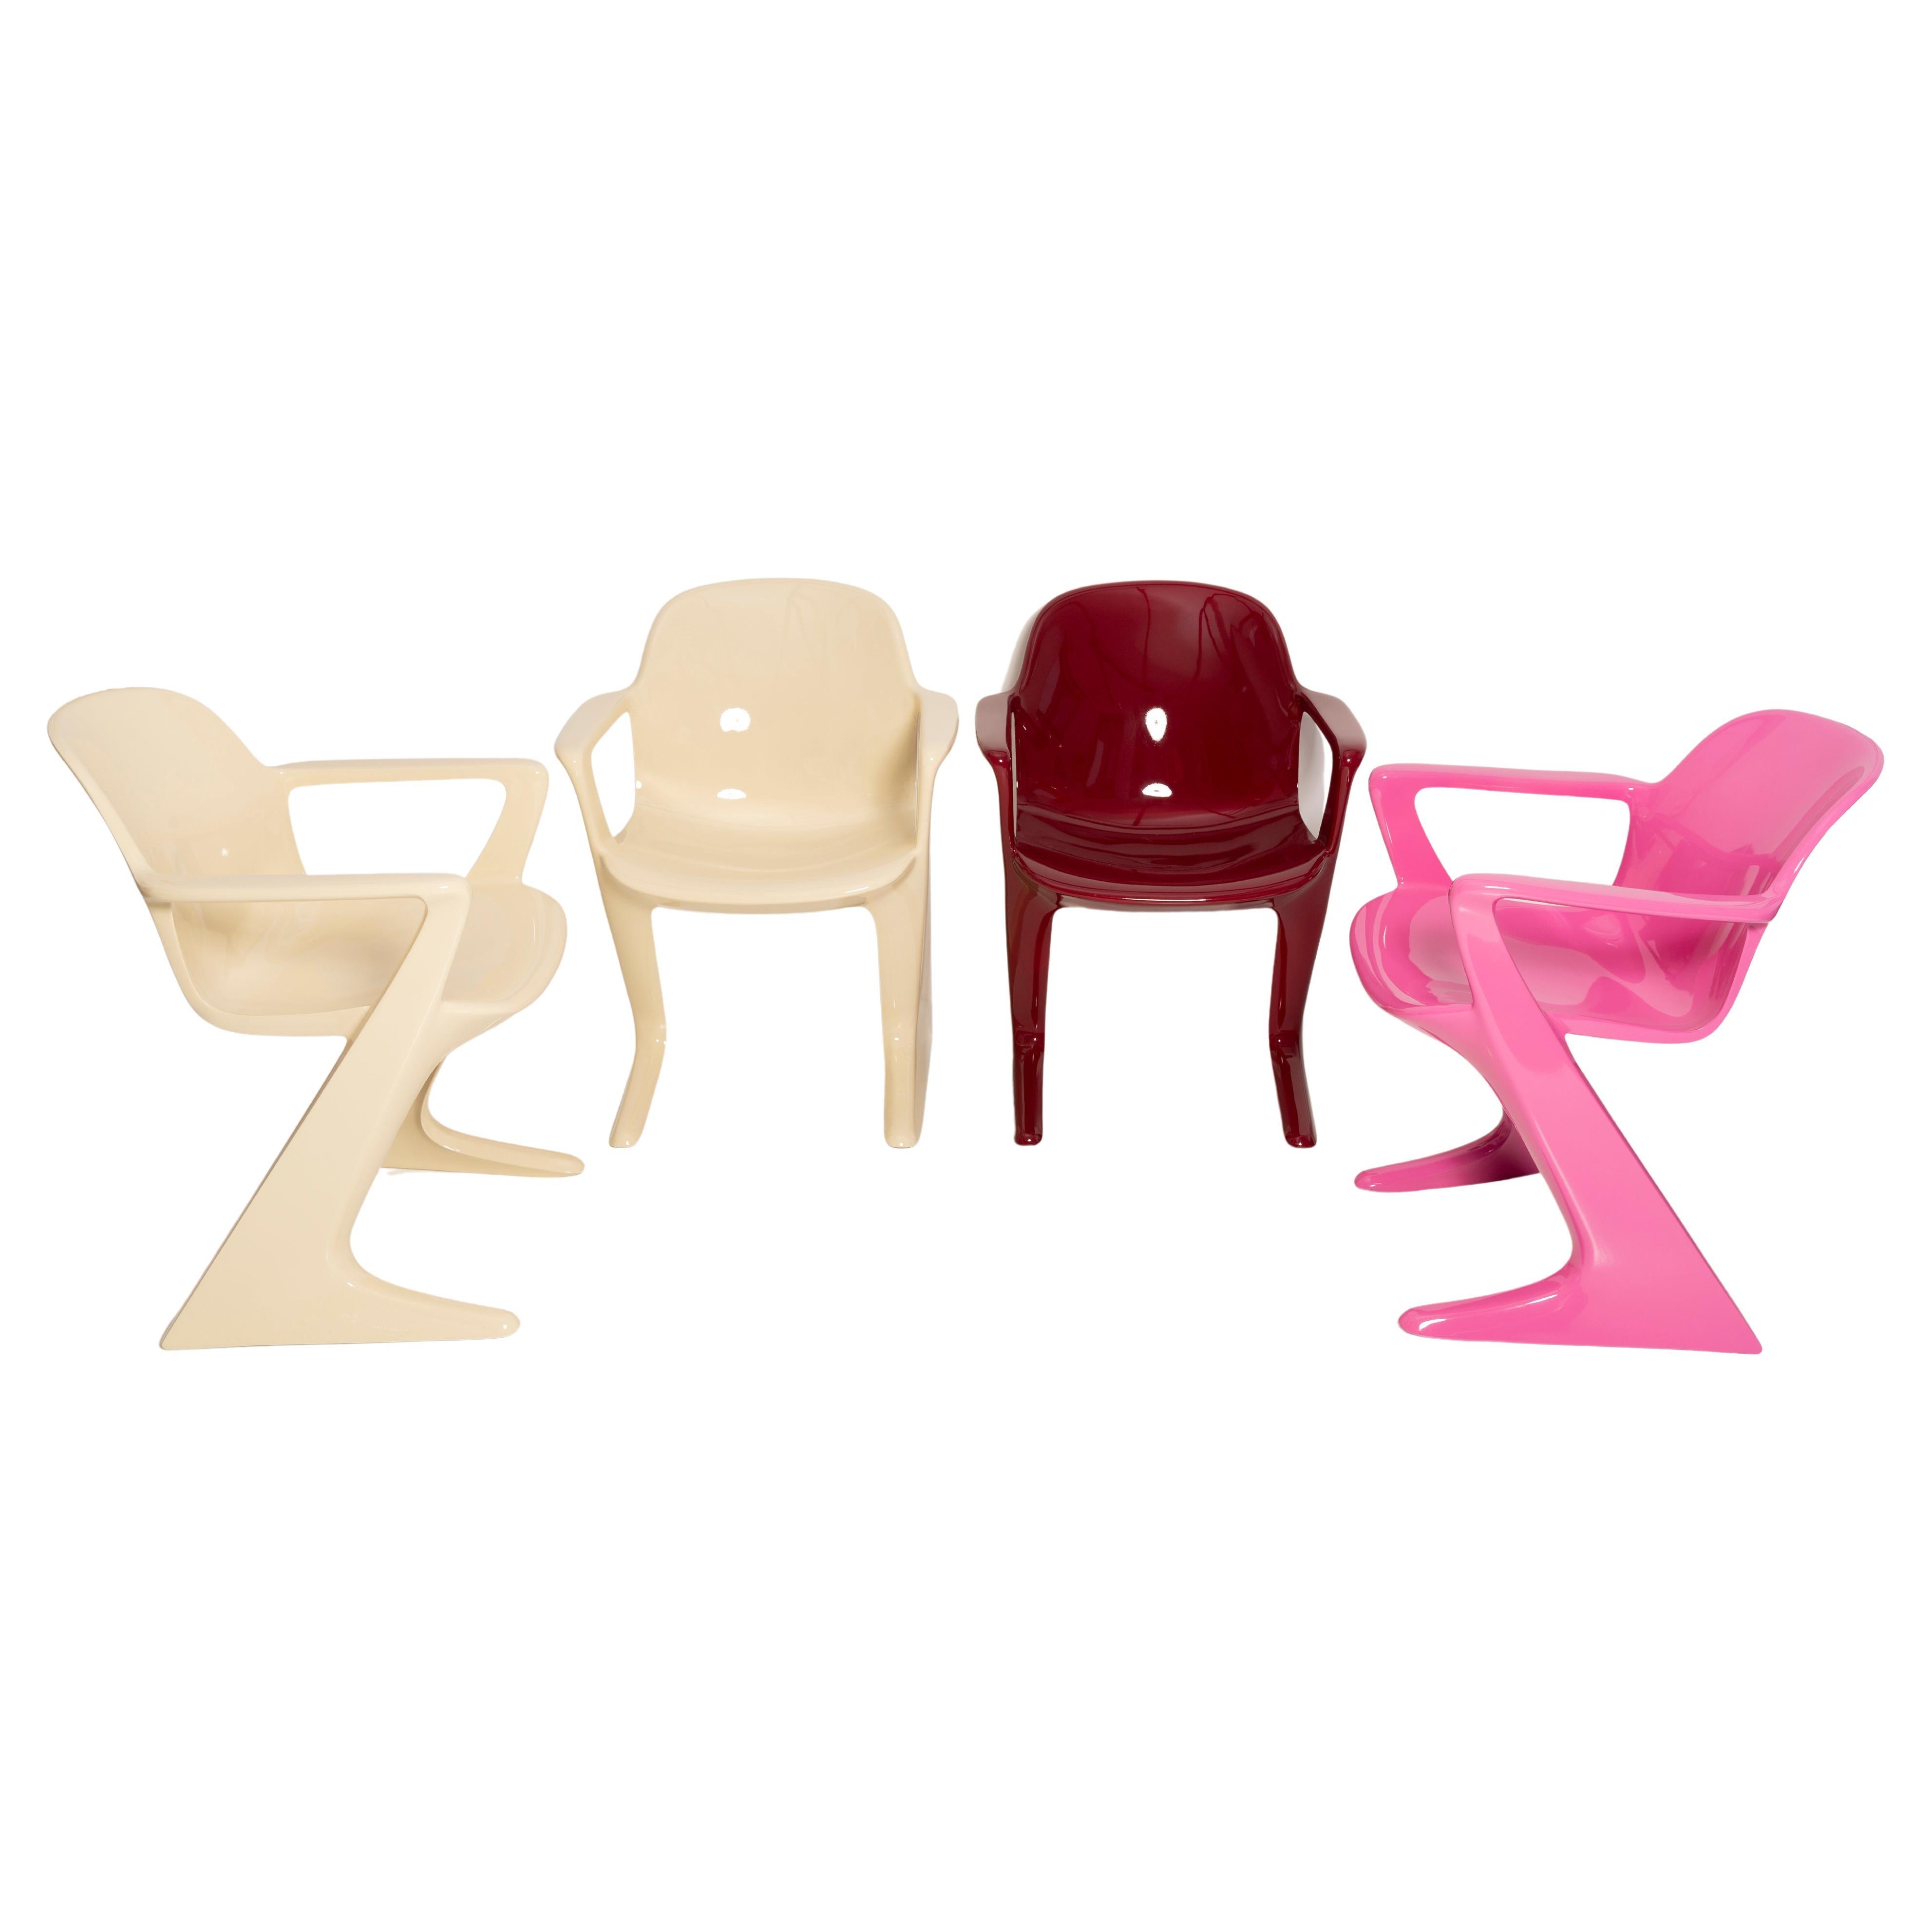 Four Mid-Century Pink Beige Red Kangaroo Chairs, Ernst Moeckl, Germany, 1960s For Sale